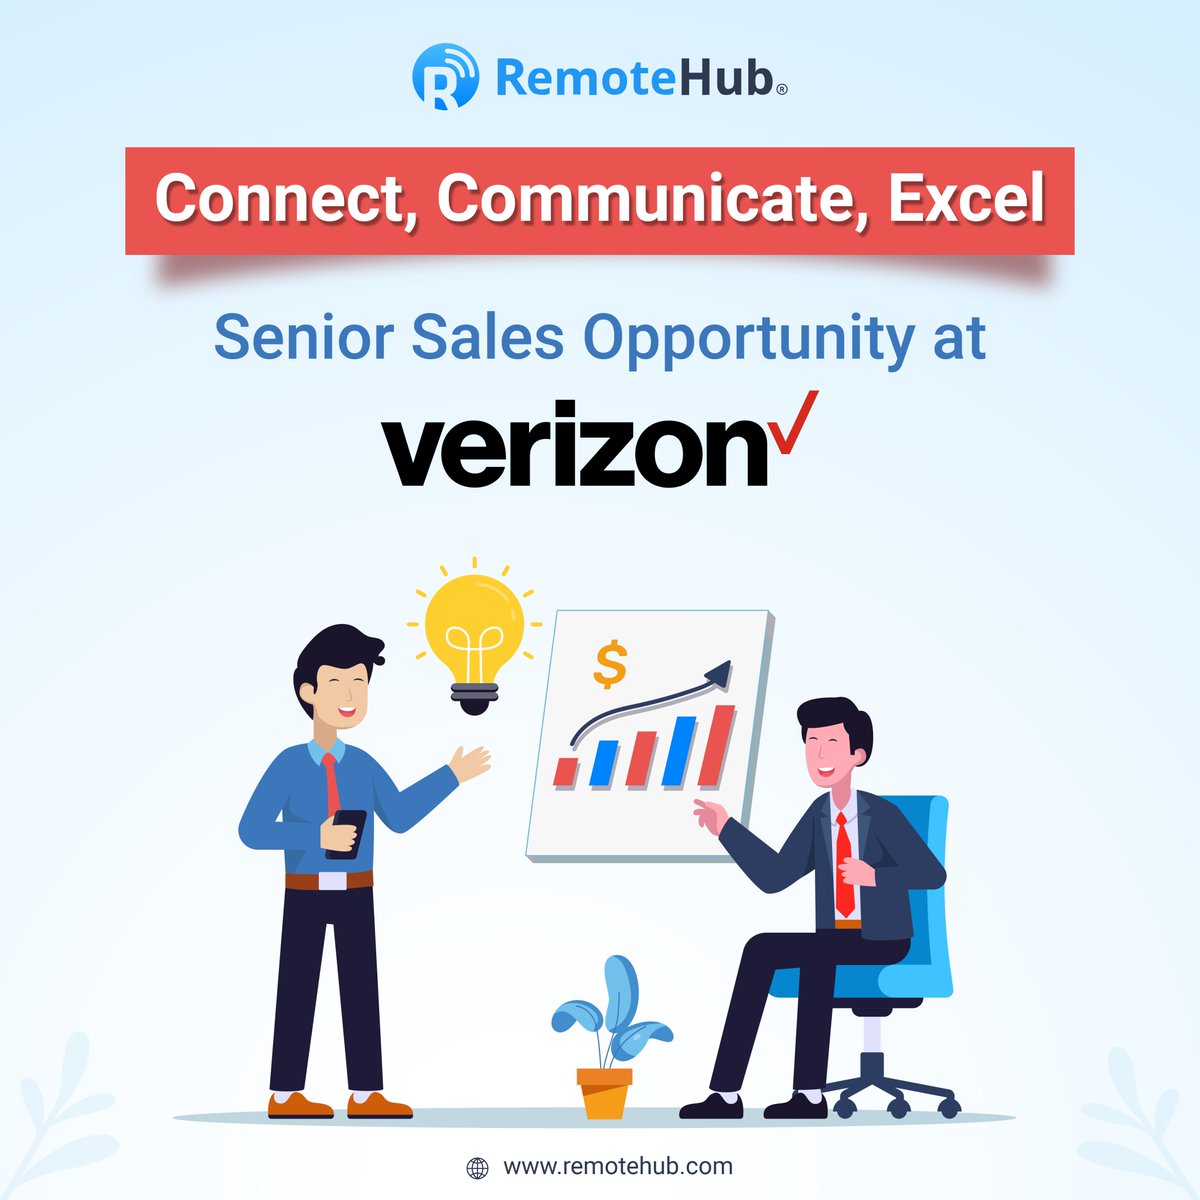 Verizon Wireless is seeking a Senior Representative-Inside Sales! Join us in managing 250 medium business accounts, ensuring top-notch service levels, and generating new opportunities. 

Apply now at: remotehub.com/jobs/details/s…
#VerizonCareers #InsideSales #NetworkLife #FullTimeJob